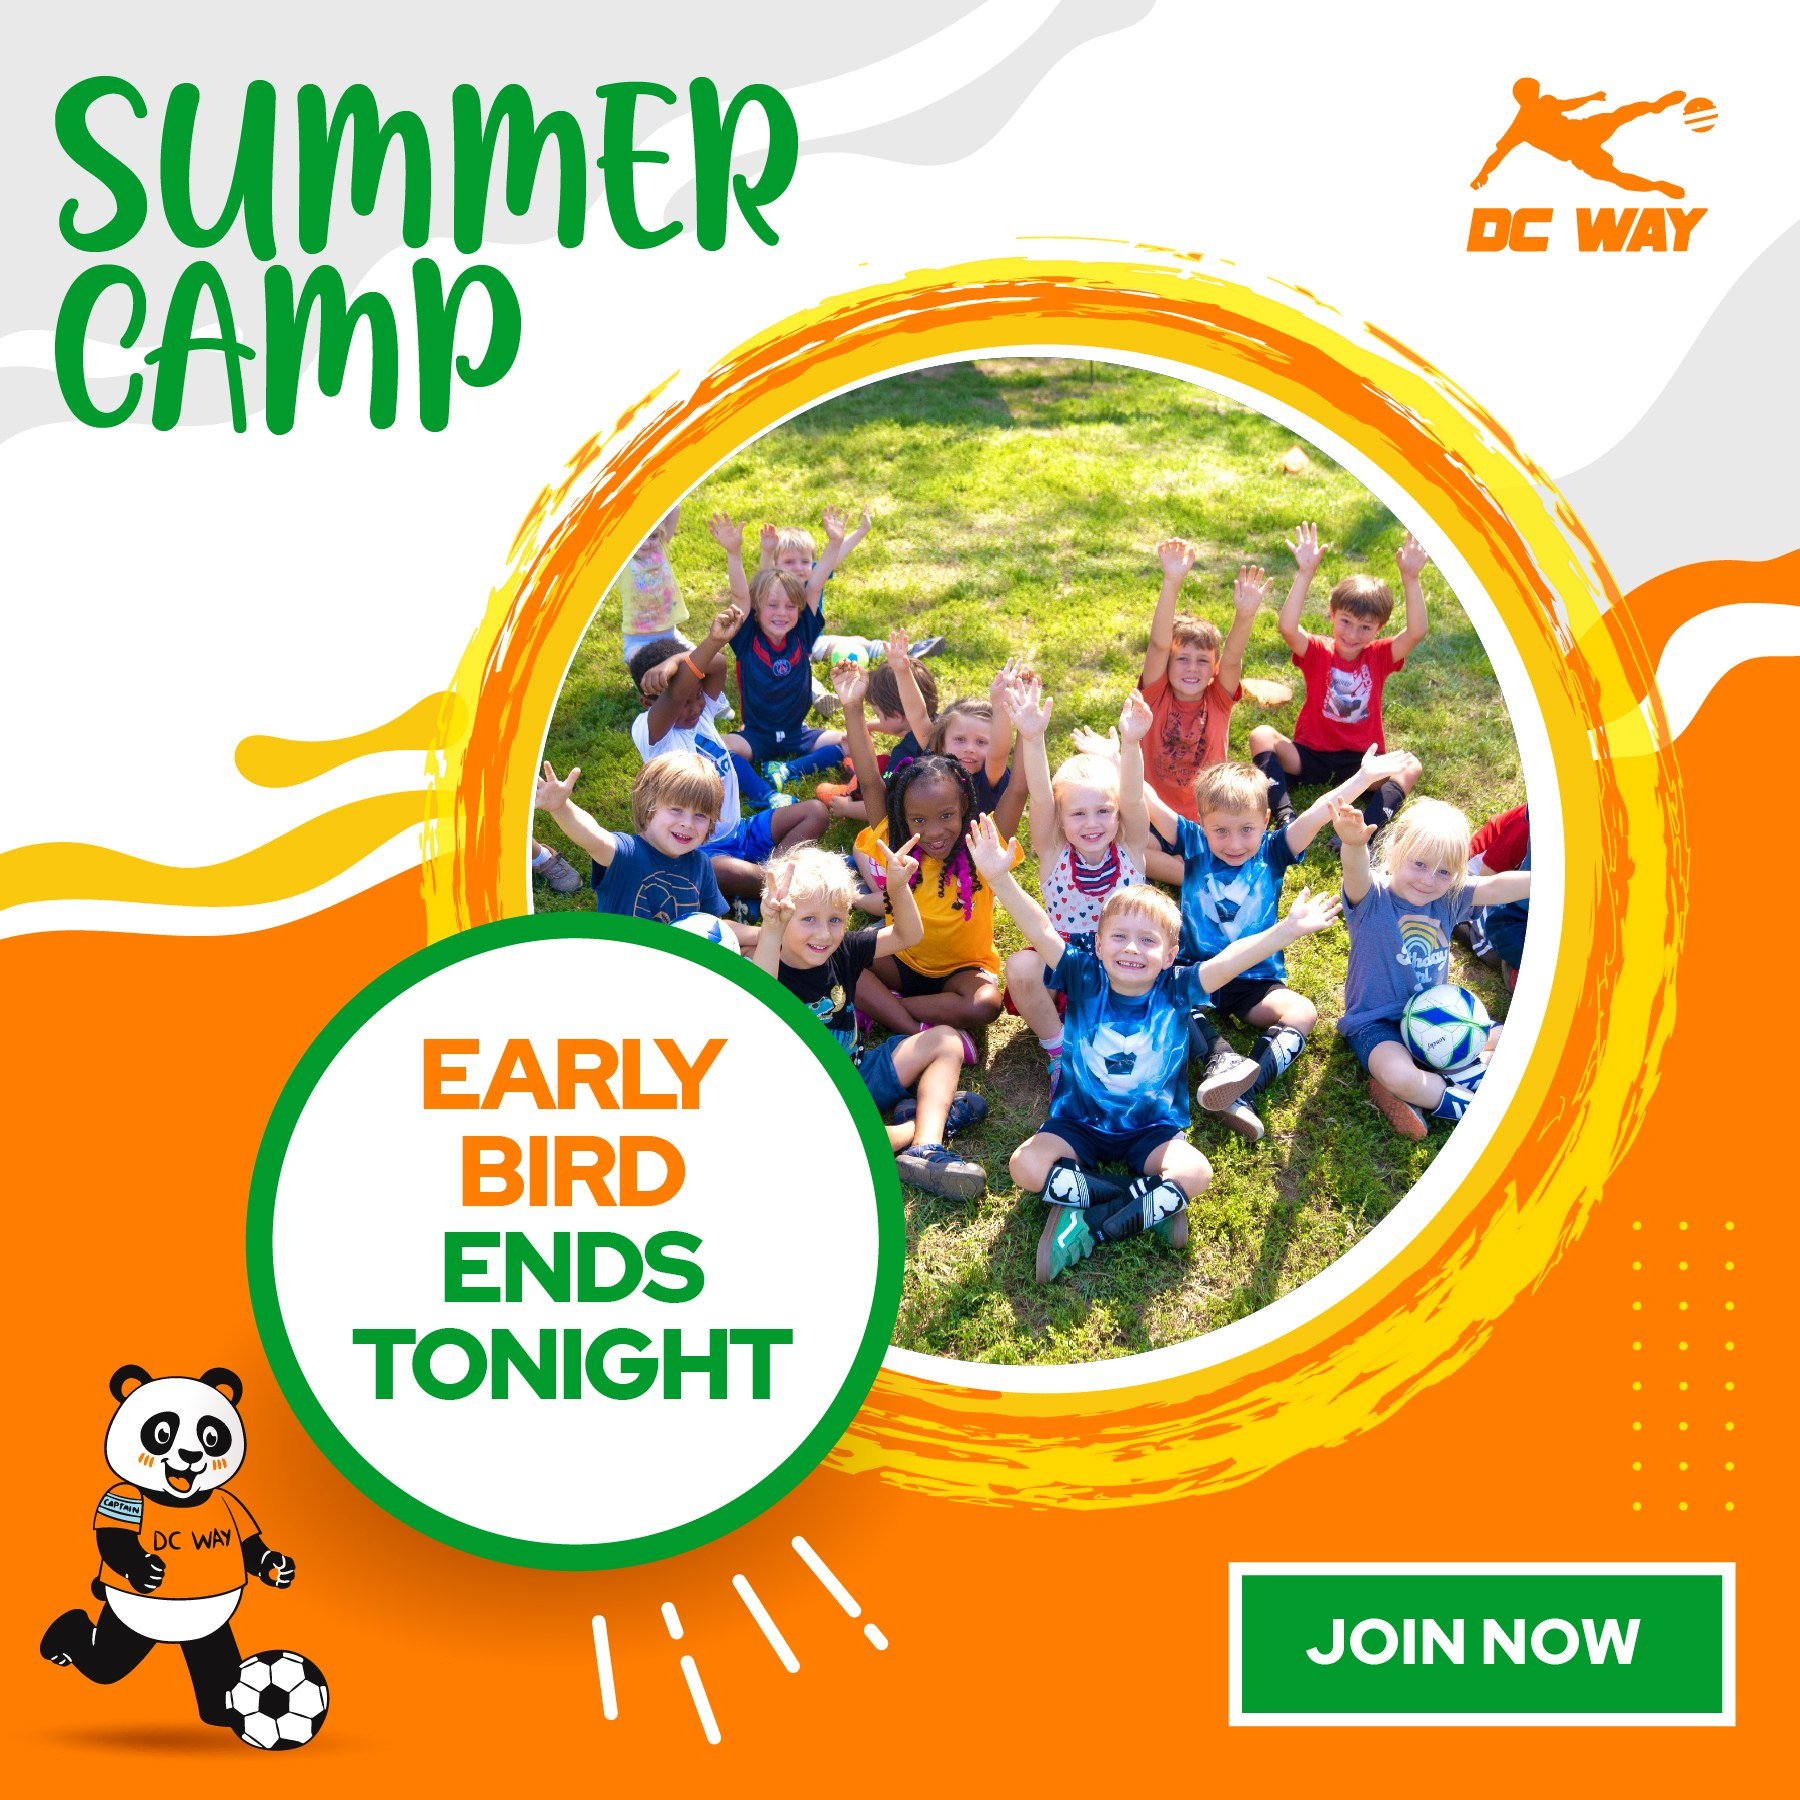 🐦 It's your Last Call! Our Summer Camp Early Bird Special ends TODAY at midnight! 🚨 Don't let this opportunity slip through your fingers!

Secure your child's spot NOW to unlock exclusive savings and ensure they have a summer filled with soccer fun